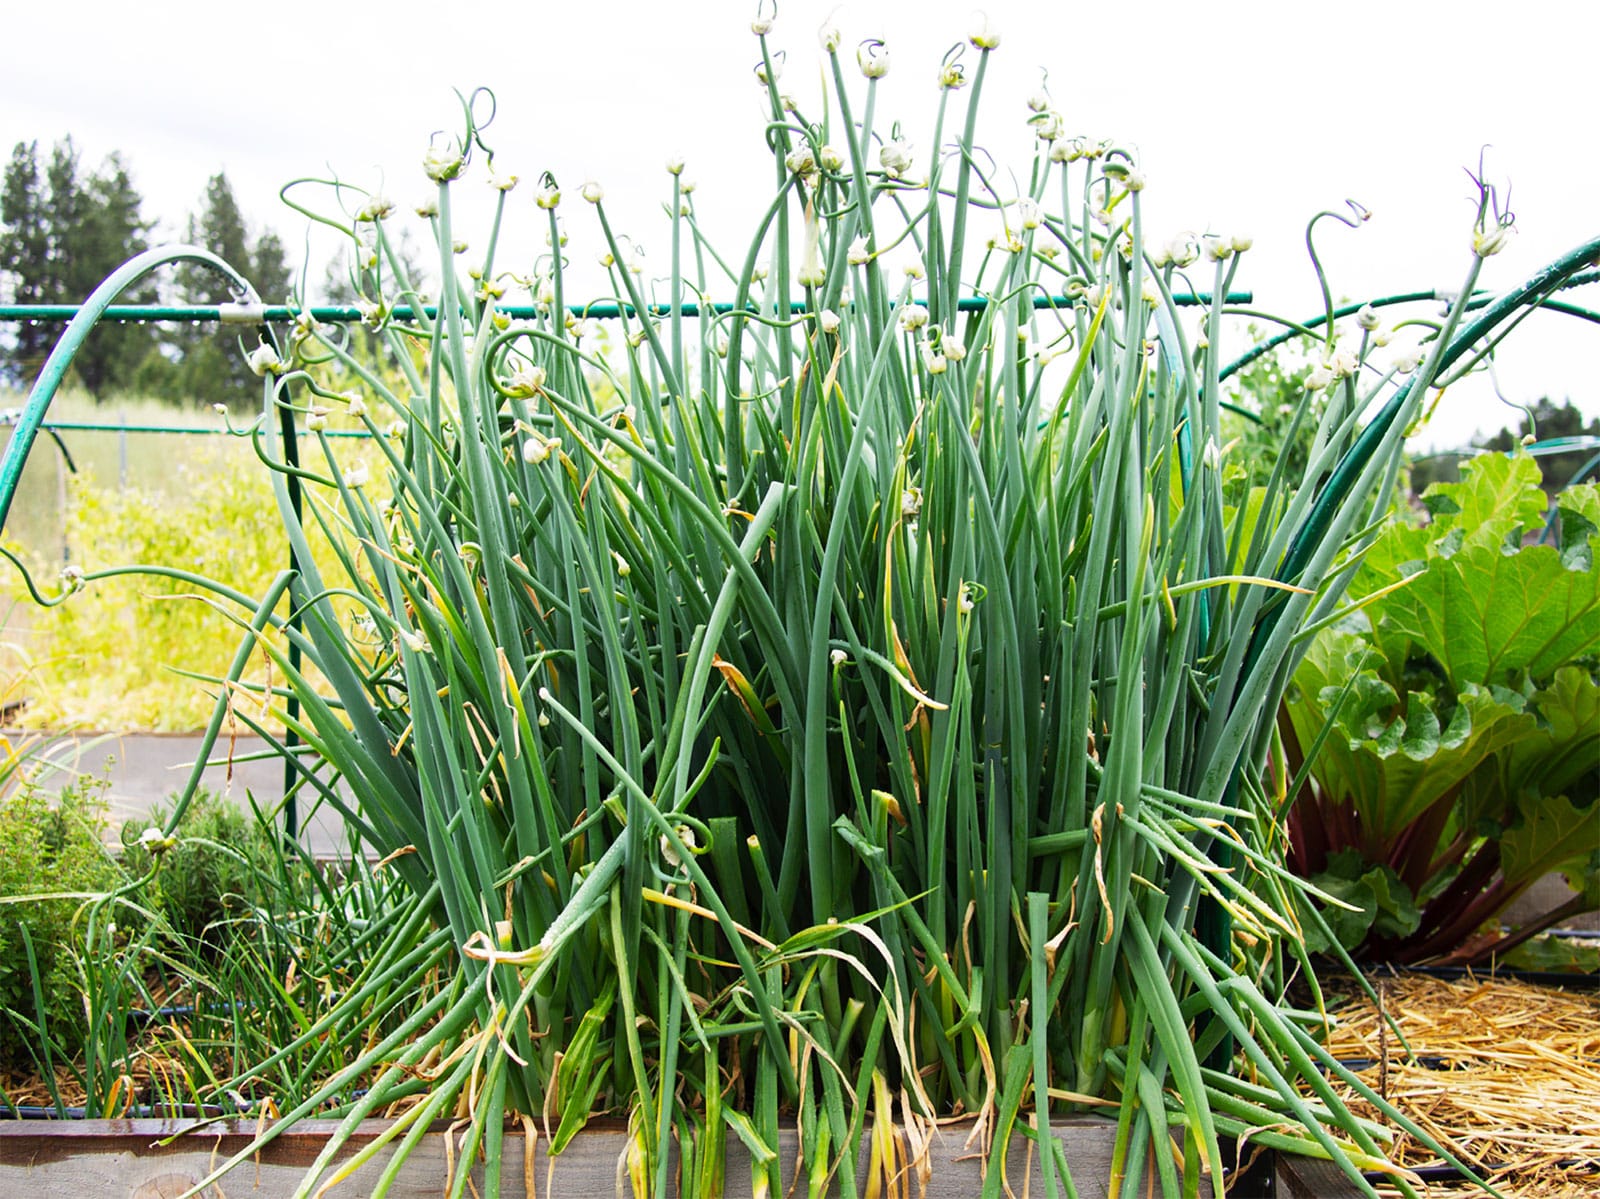 Walking onions (also known as Egyptian walking onions) growing in a garden